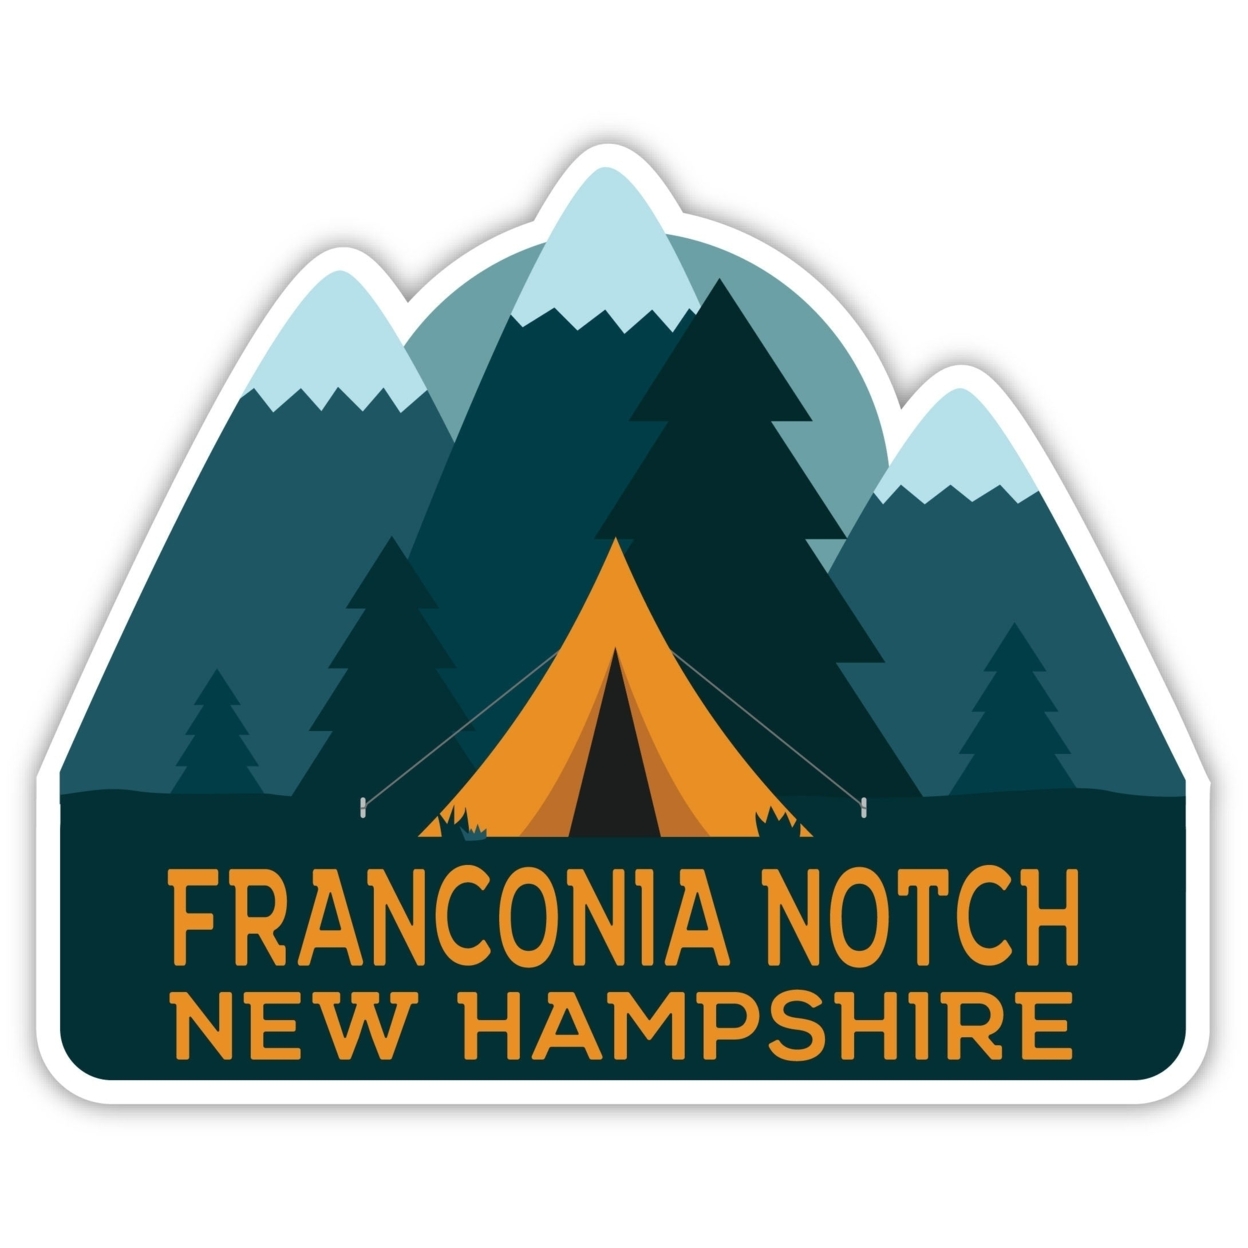 Franconia Notch New Hampshire Souvenir Decorative Stickers (Choose Theme And Size) - 4-Pack, 6-Inch, Adventures Awaits